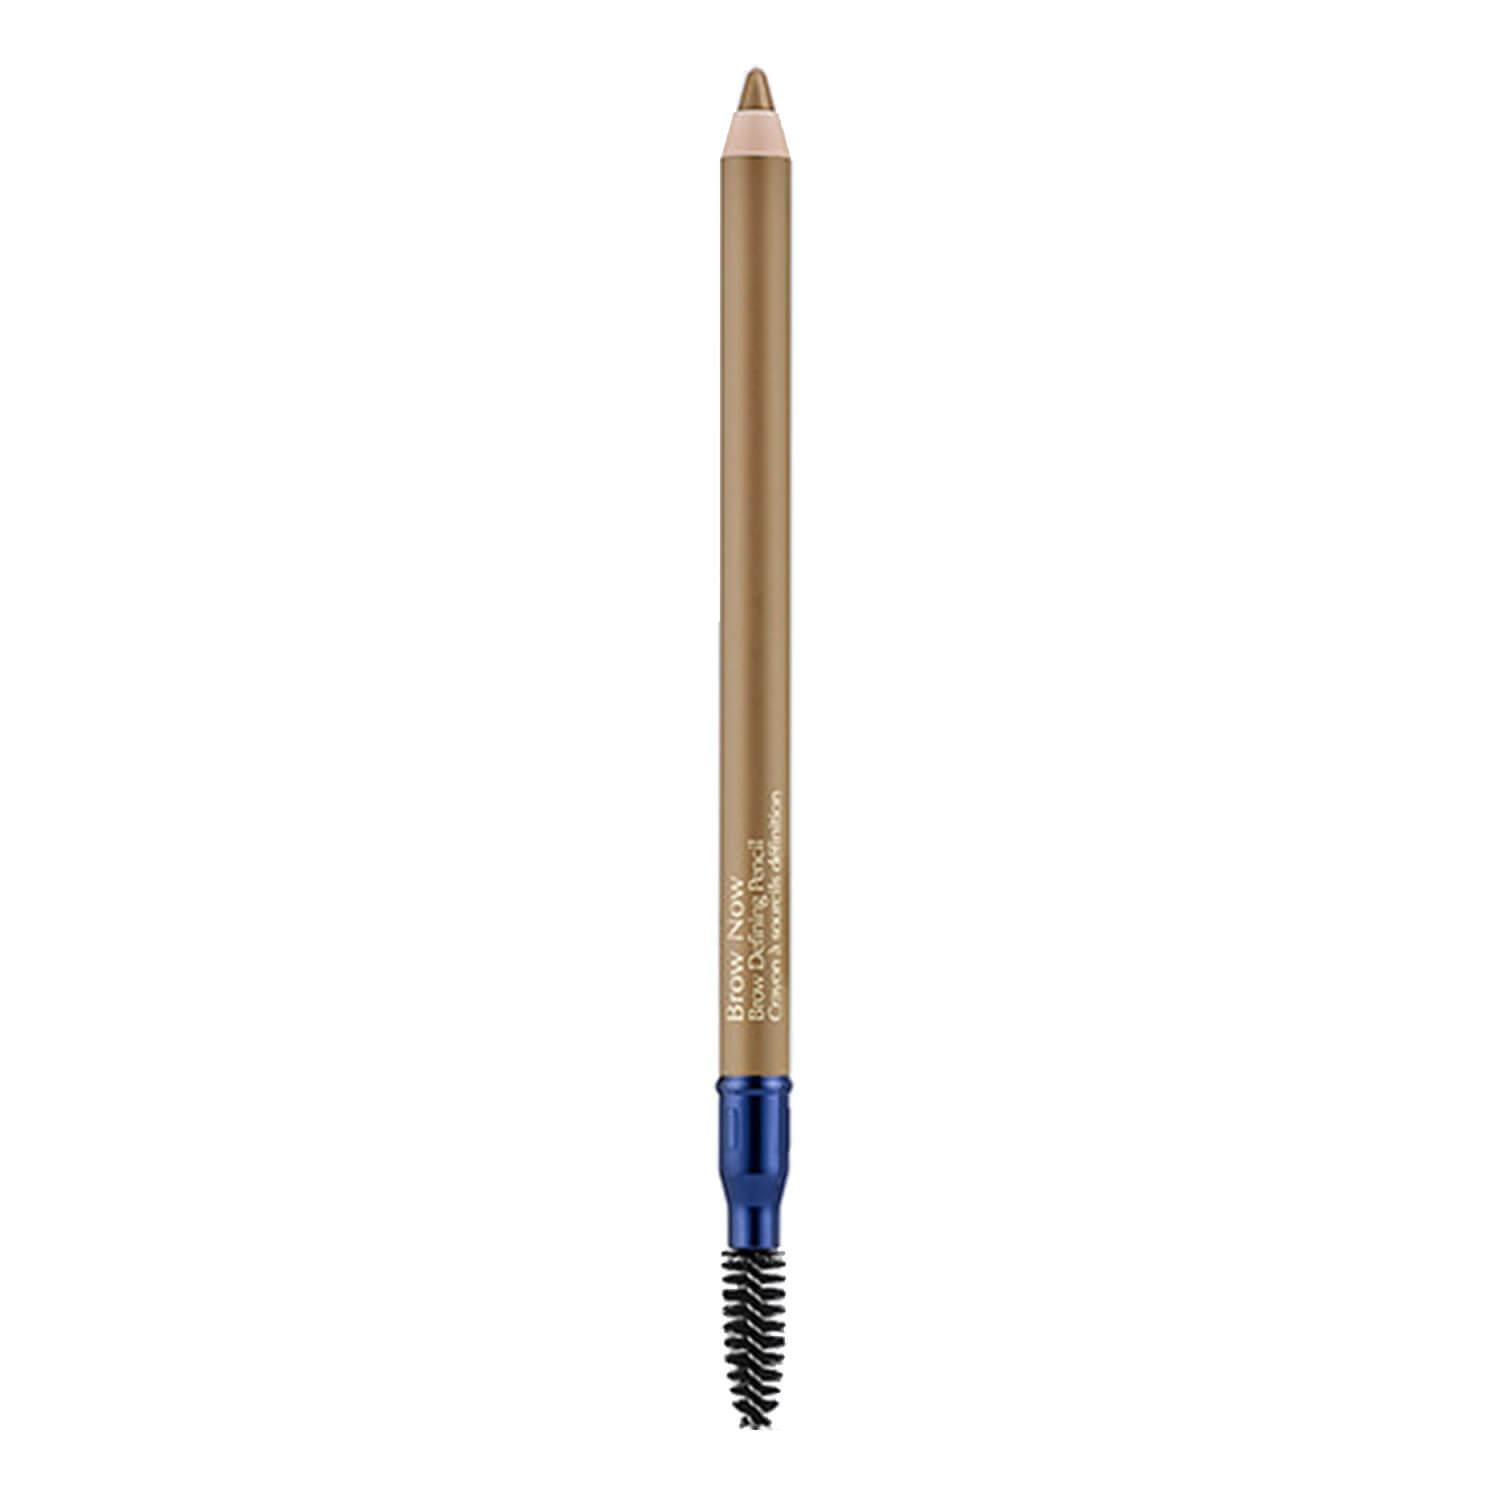 Brow Now - Brow Defining Pencil 01 Blonde